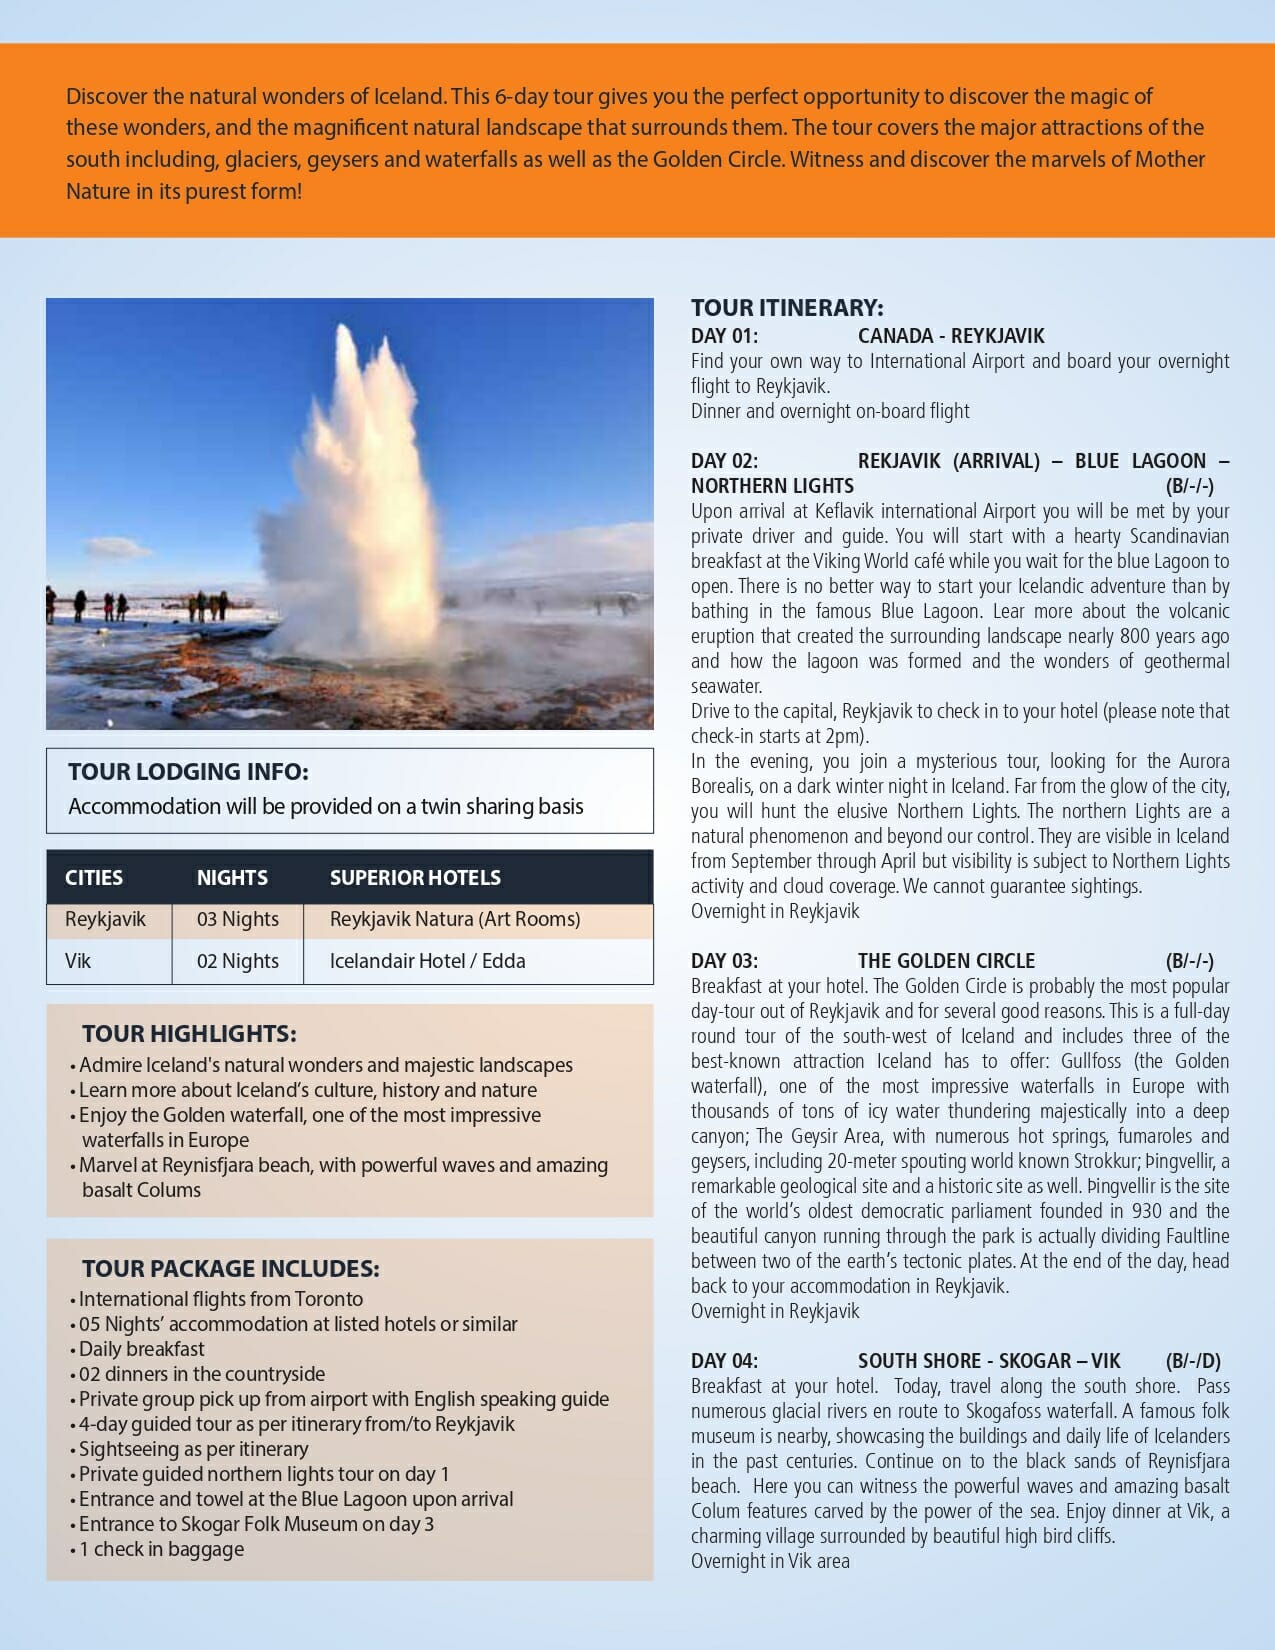 Best of Iceland 7 Day Tour - Page 2 of 3